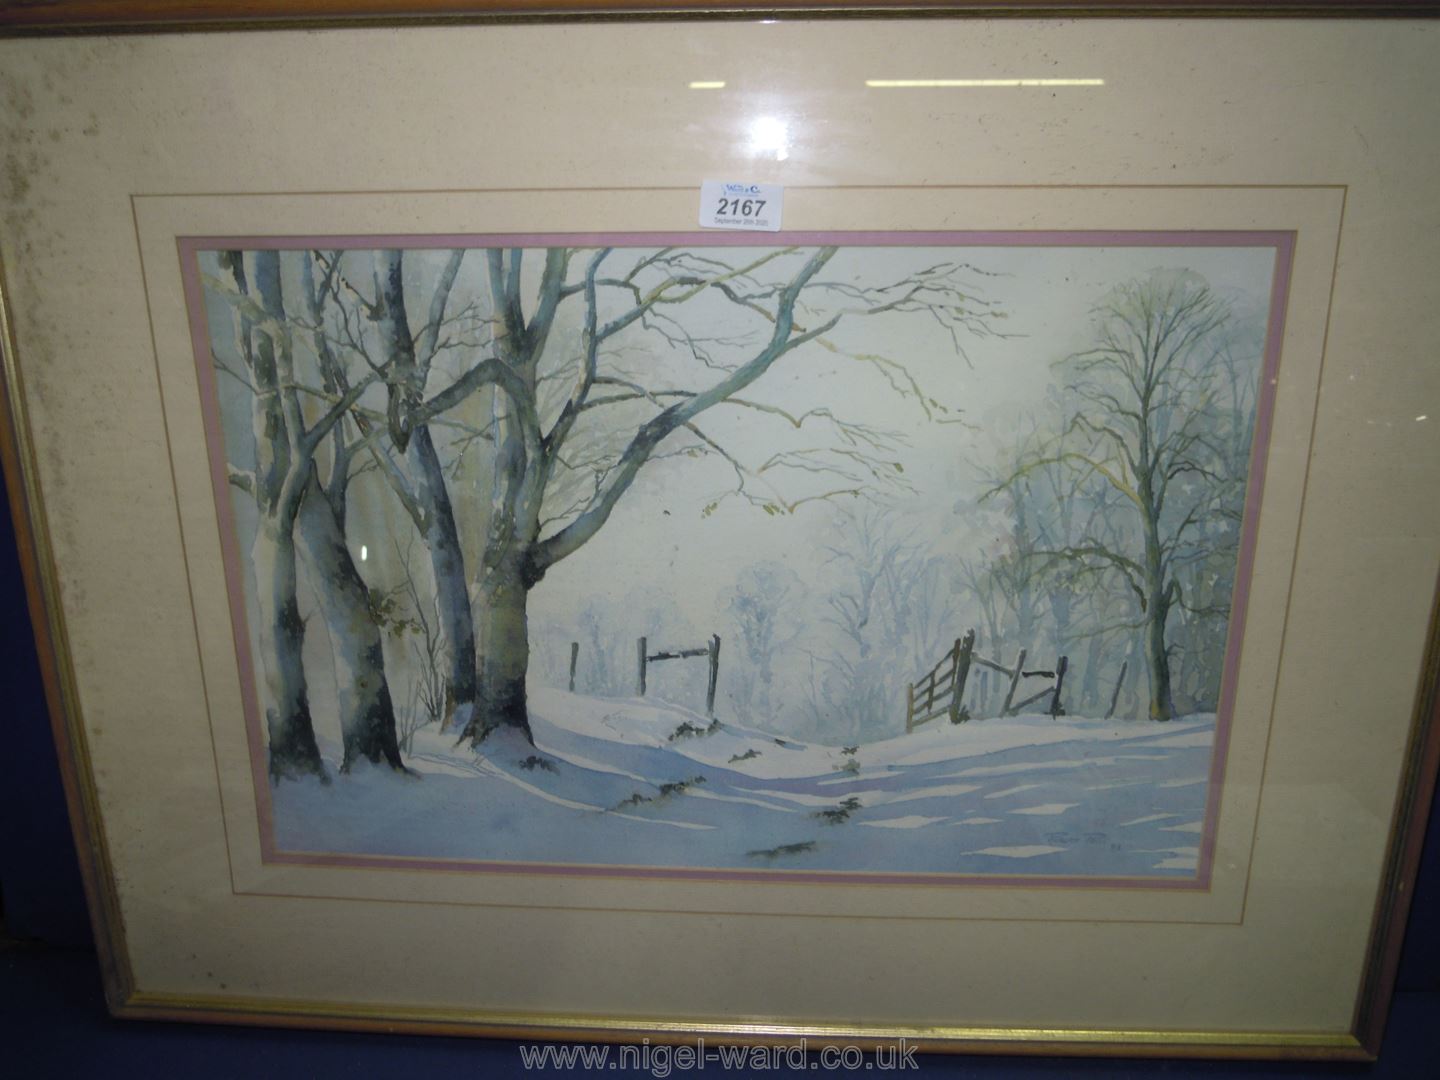 A large framed and mounted watercolour depicting a snowy country scene; signed Robert Price,